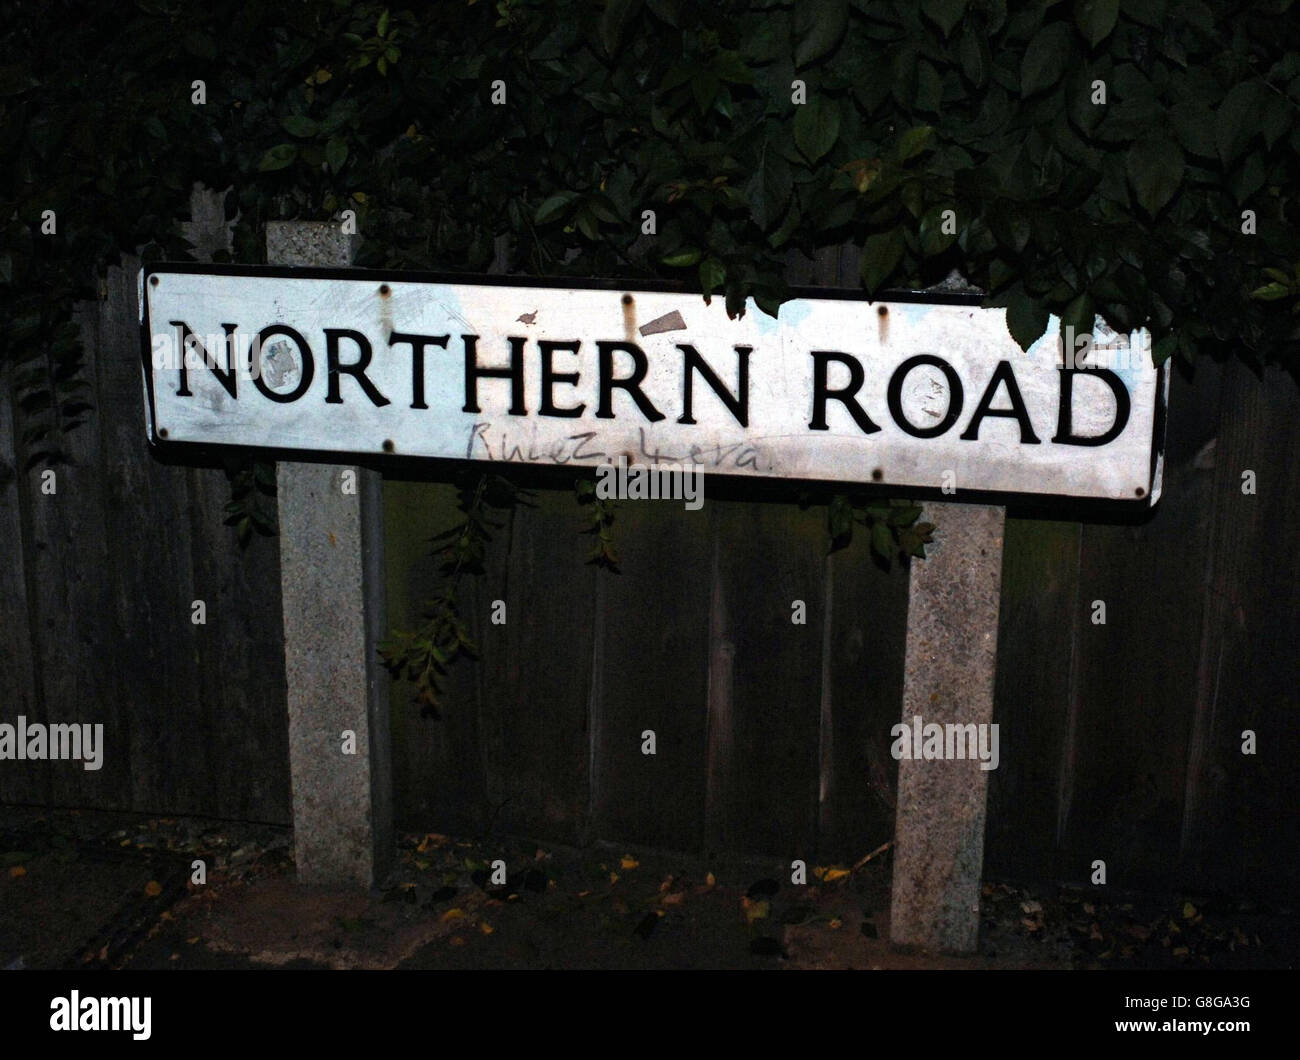 Road sign in Northern Road, where anti-terror police raided a house in connection with the London 'burning cross' bombing gang. Officers - some of whom were armed - swooped on the bay-fronted, 1930s semi-detached at about 7pm on Wednesday night. No arrests were made and no explosive substances are believed to have been recovered. It is thought the house may be connected to one of the cars recovered at Luton railway station. Stock Photo